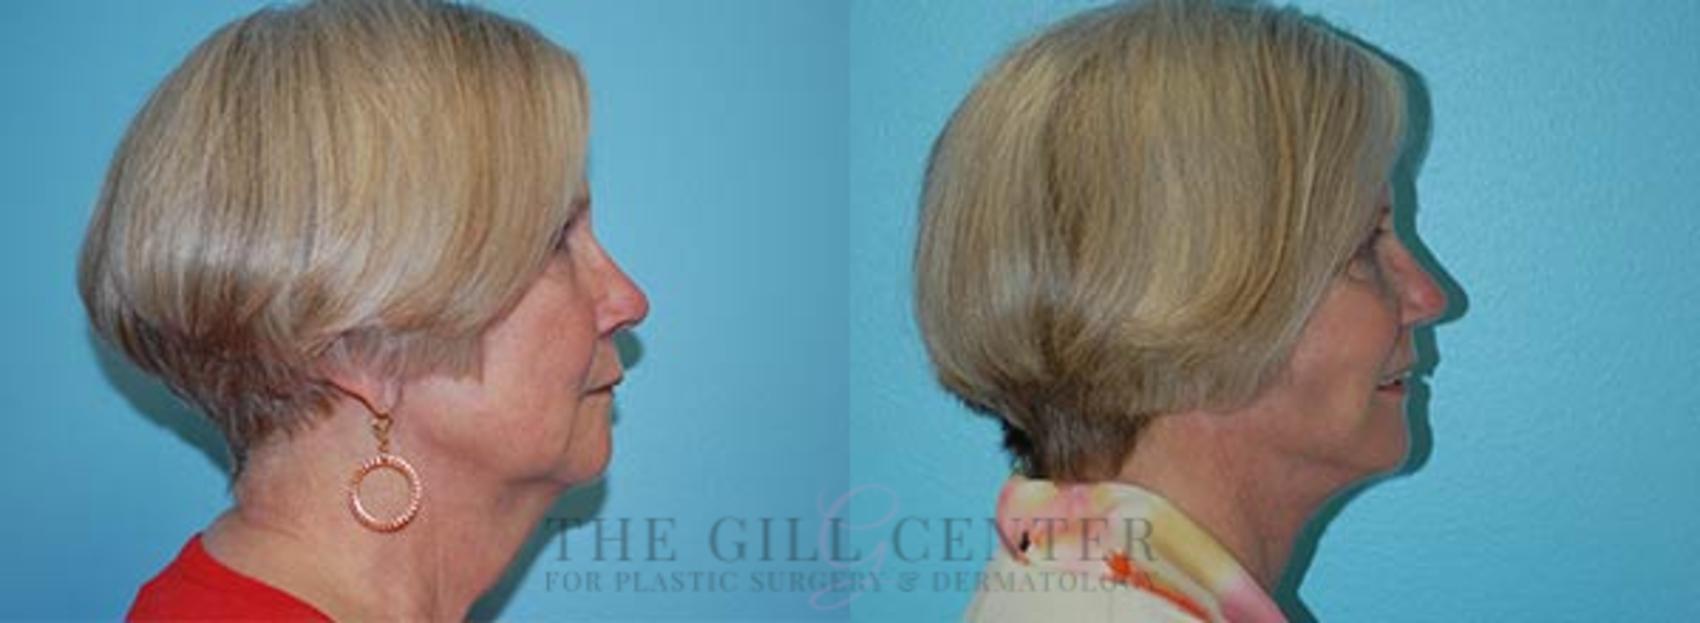 Face & Neck Lift Case 416 Before & After Right Side | The Woodlands, TX | The Gill Center for Plastic Surgery and Dermatology